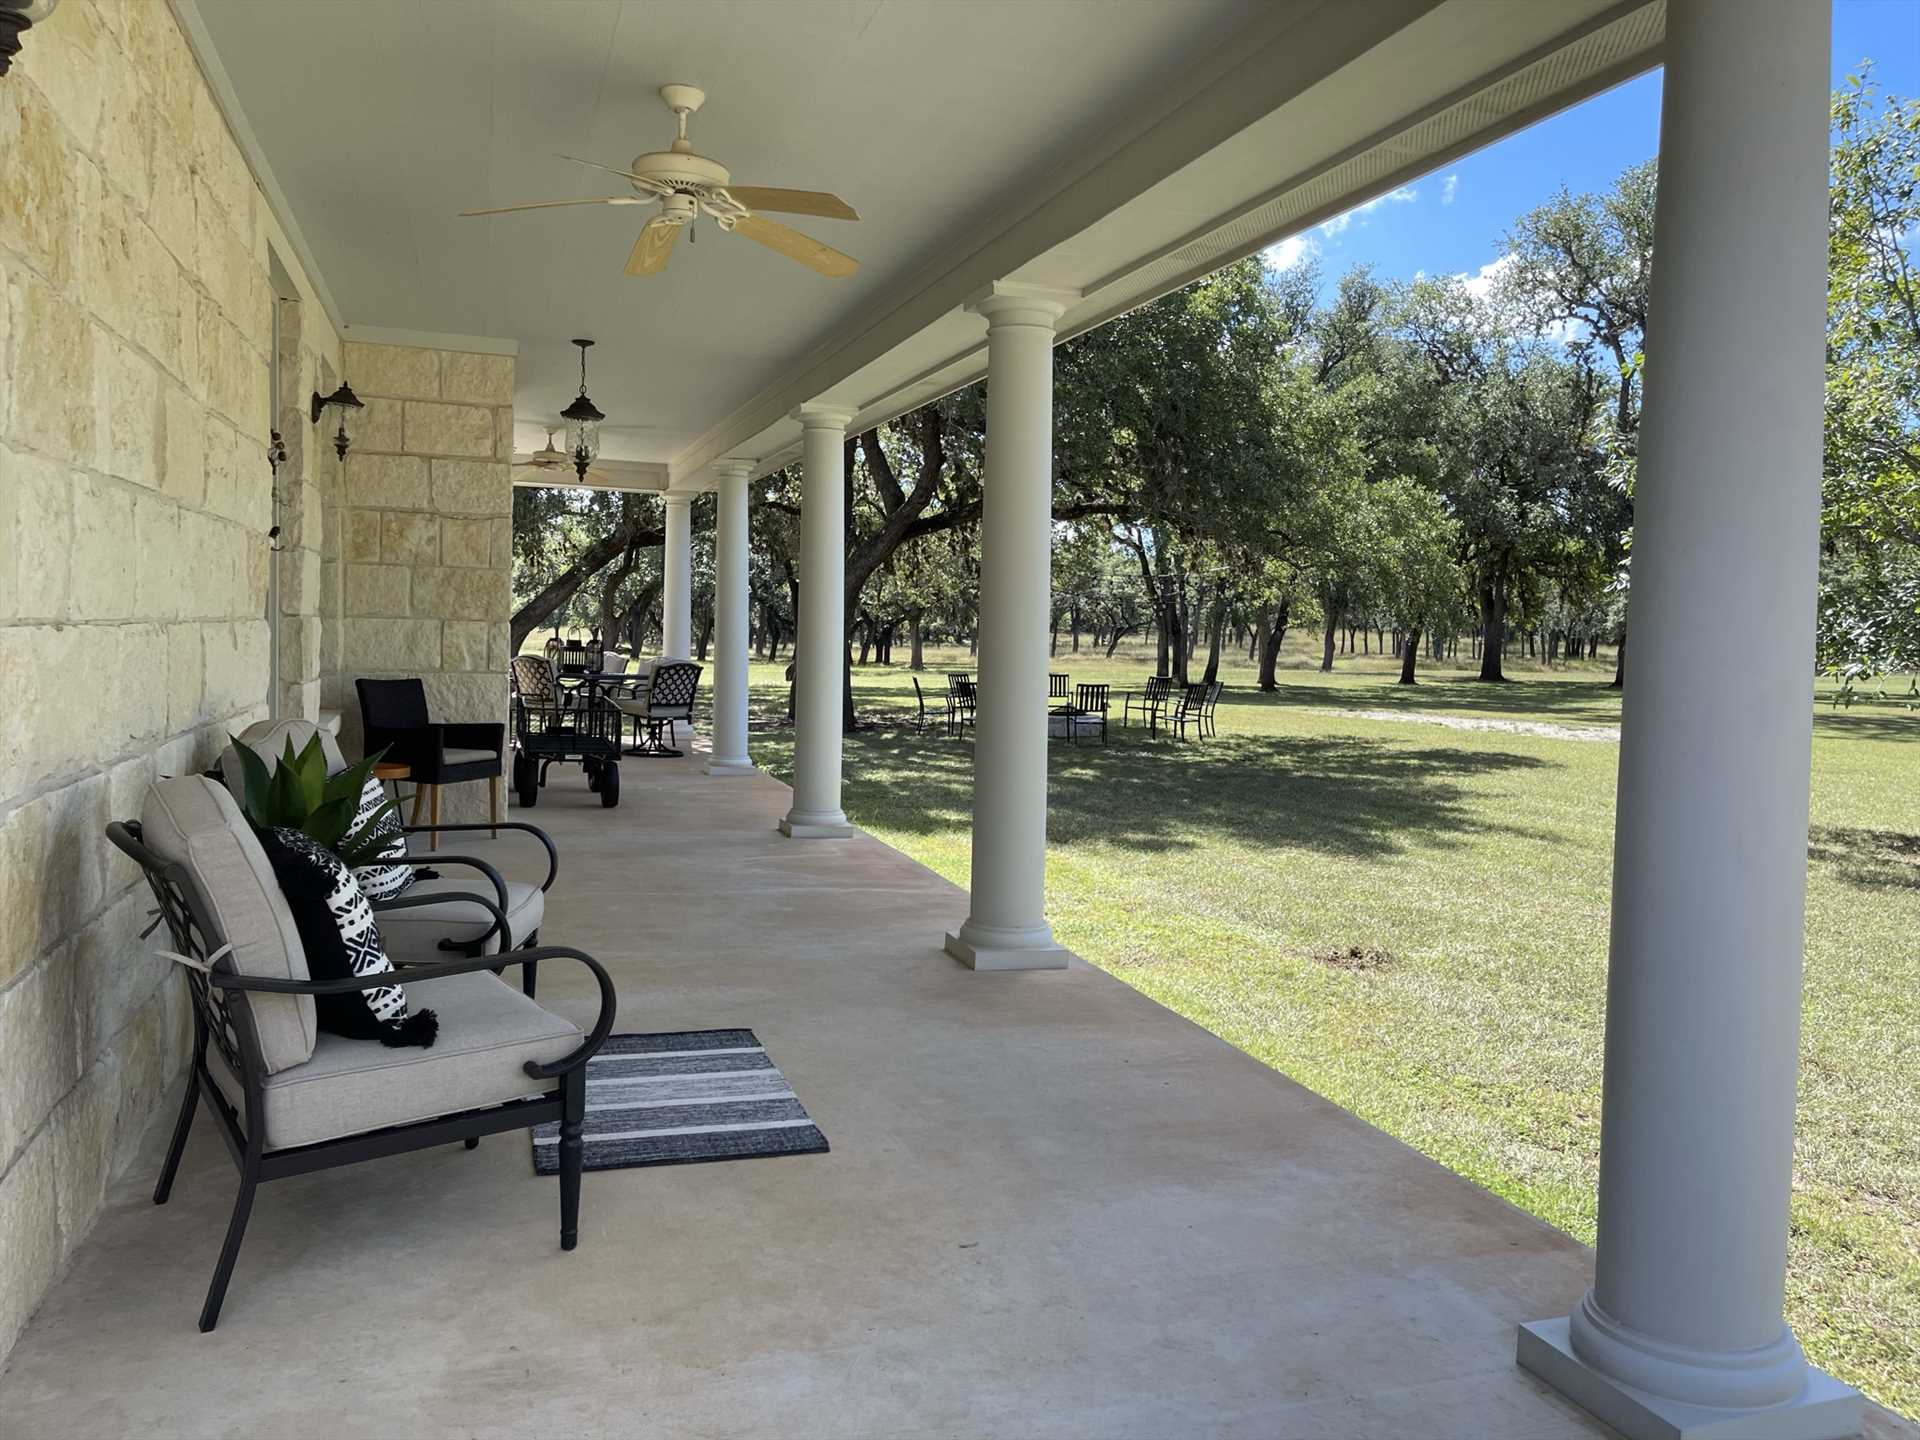                                                 Kick back like ranch royalty on the shaded porches! Ceiling fans help to stir a cooling breeze when there isn't one blowing.